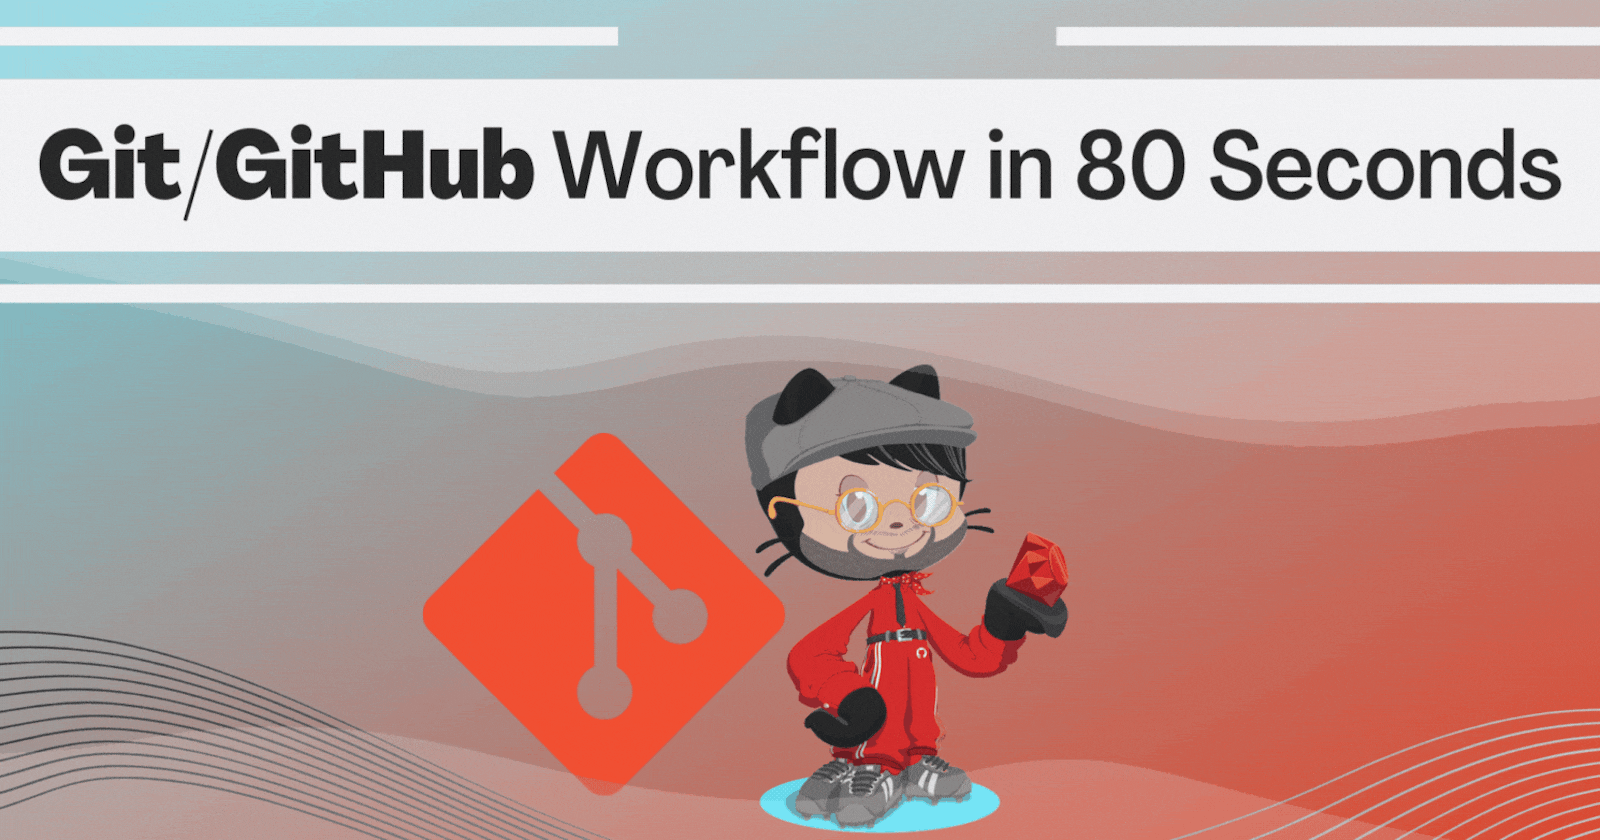 Git/GitHub Workflow in 80 seconds